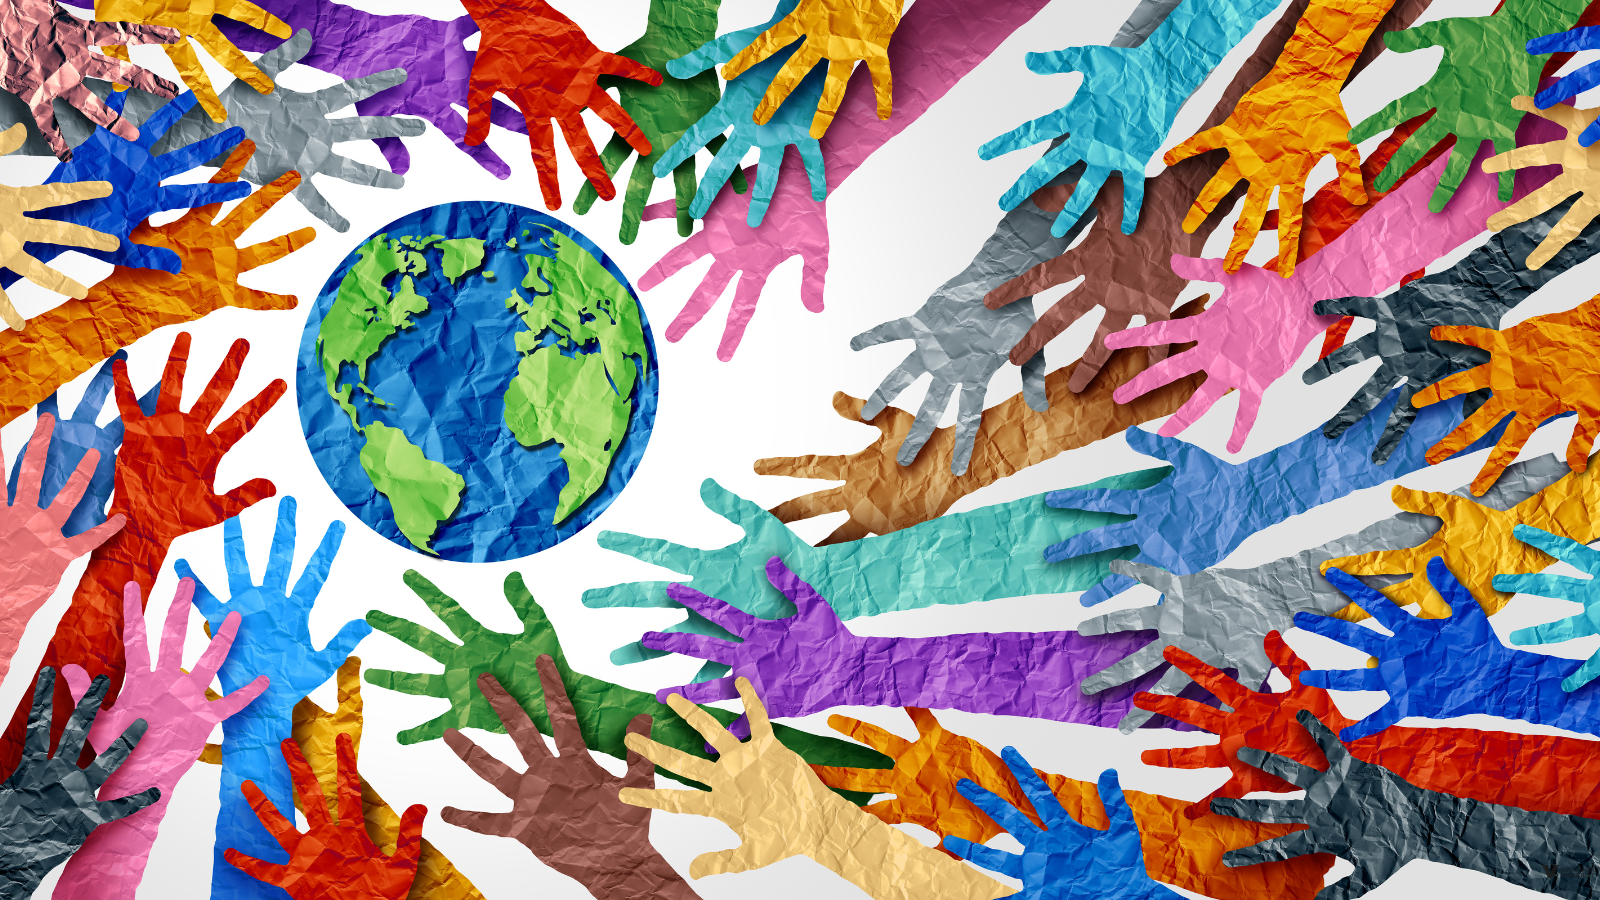 An assortment of hands in a variety of rainbow colors reach toward a globe.